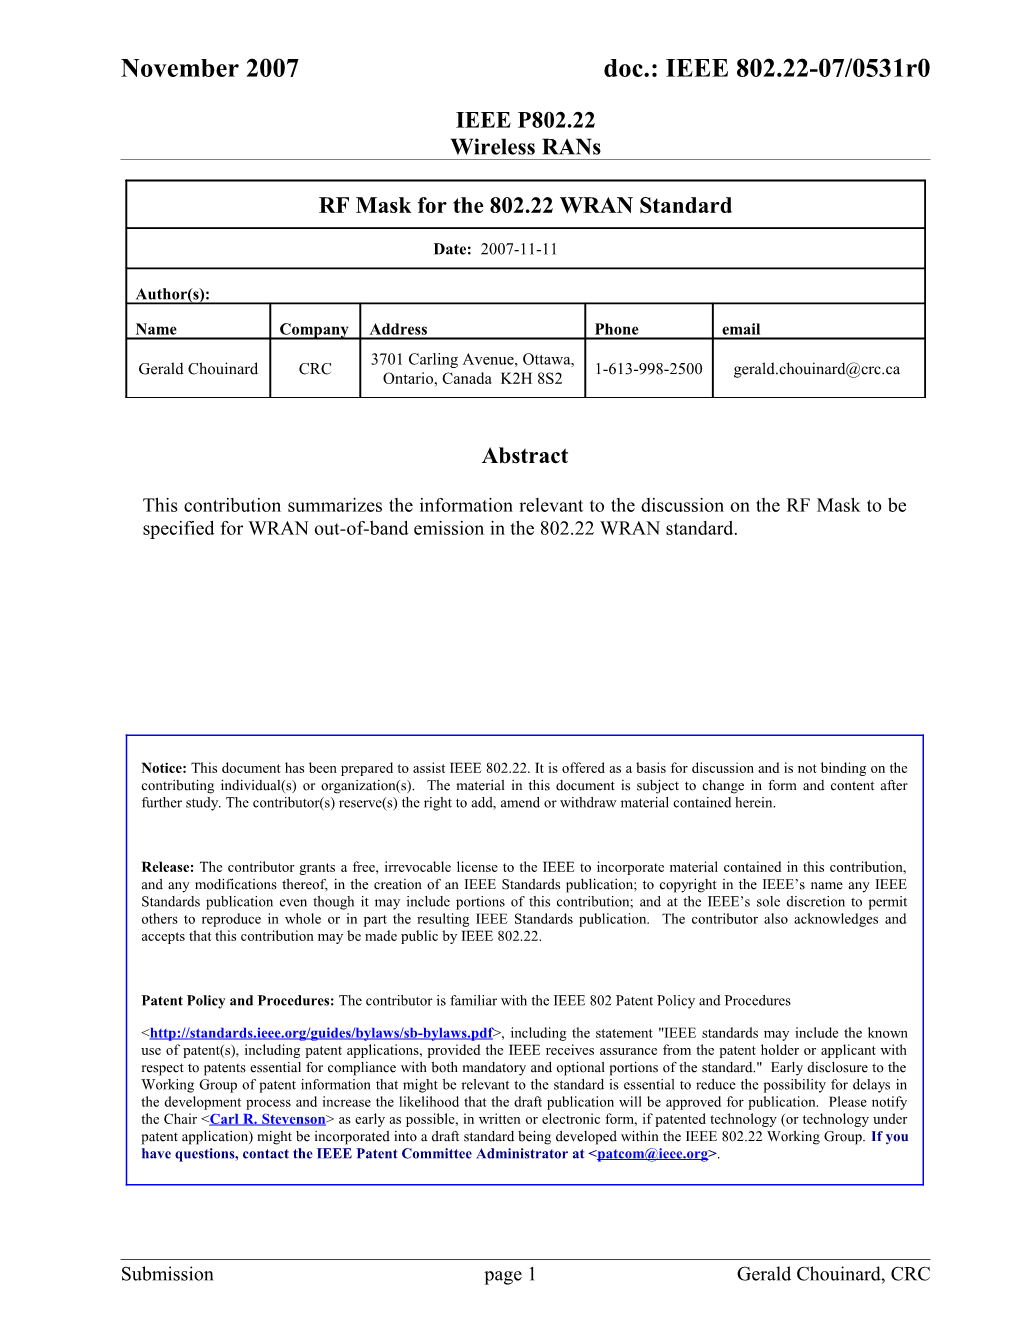 1. RF Mask Deduced from the Functional Requirement Document